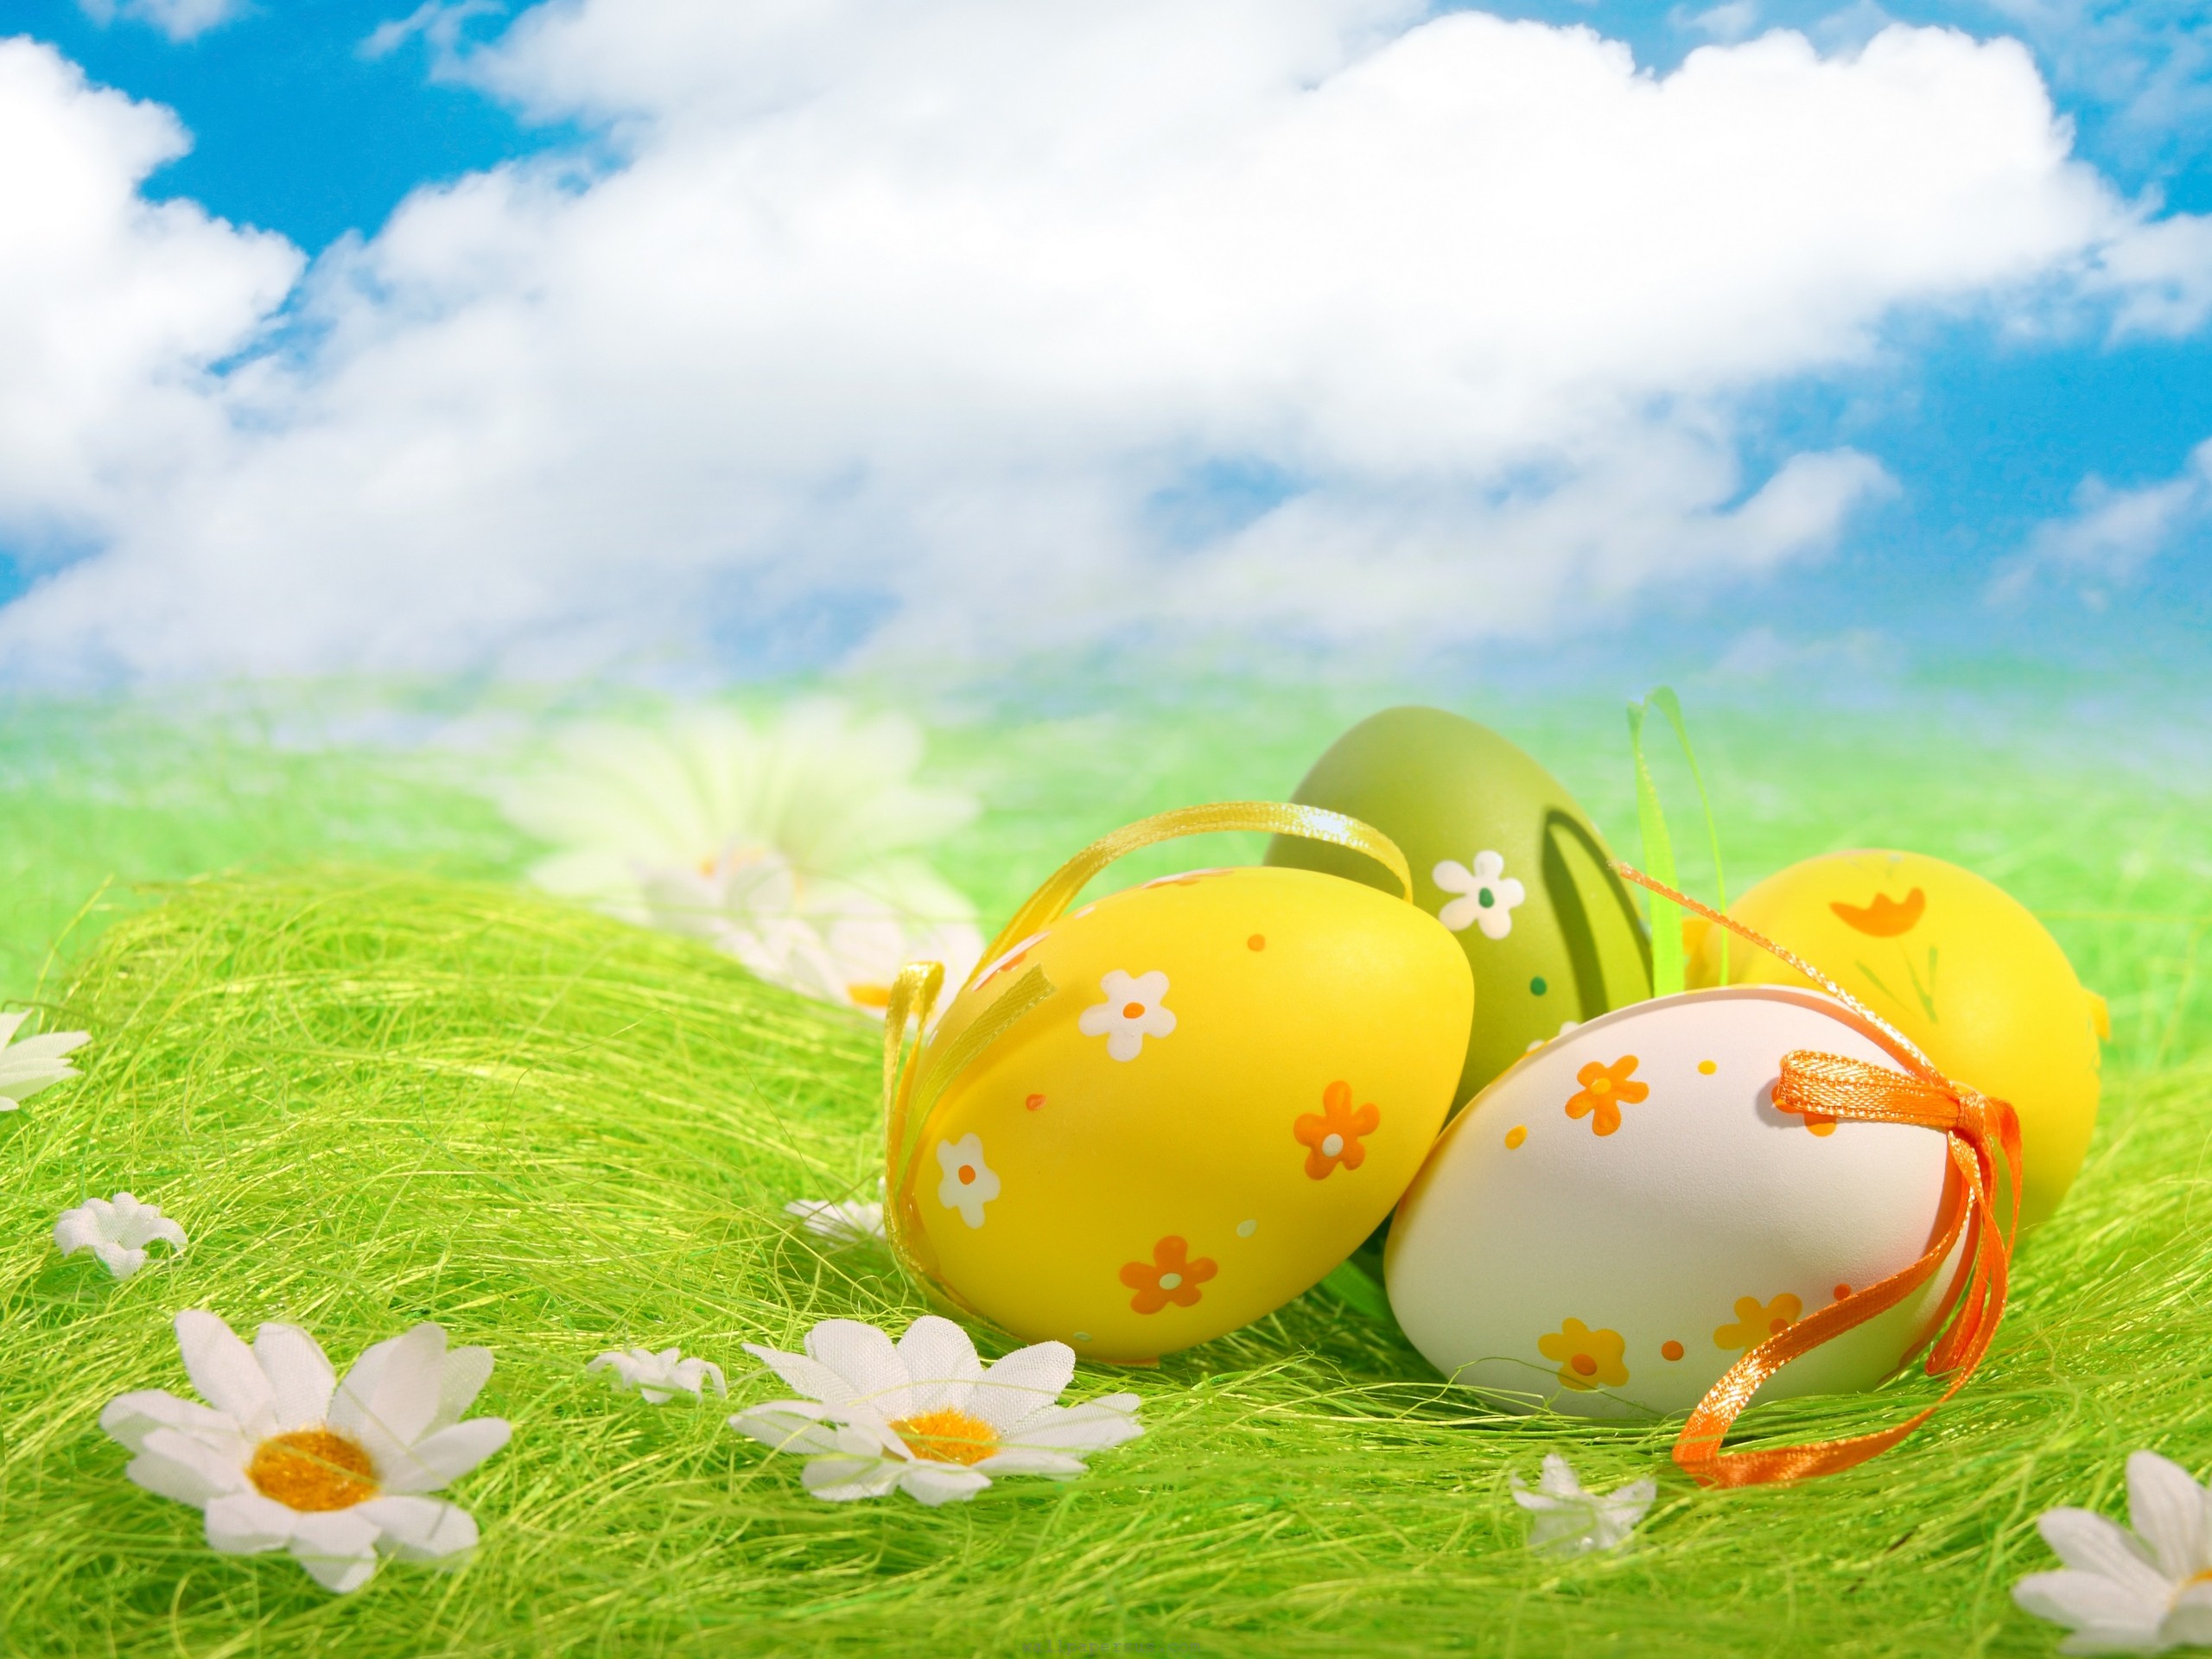 The Easter Wallpaper Category Of HD Image